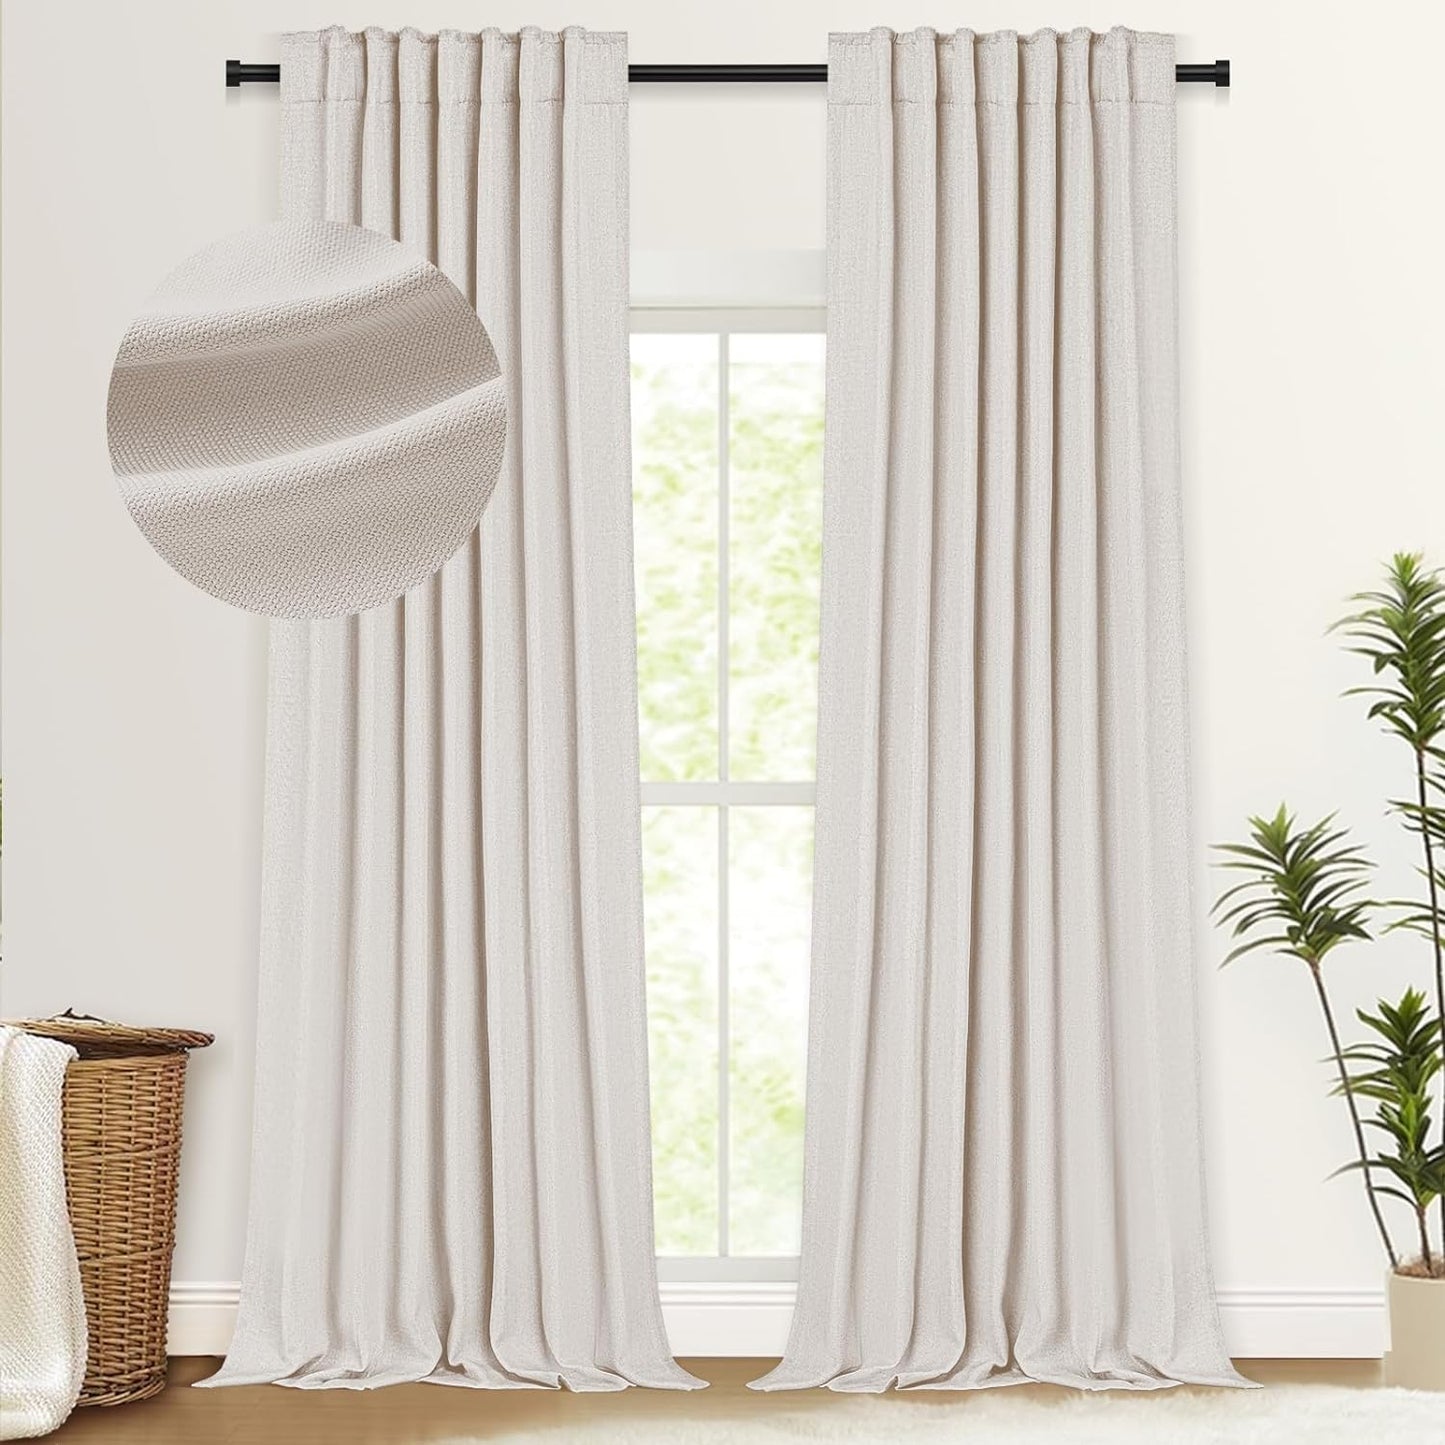 100% Blackout Shield Faux Linen Blackout Curtains for Bedroom 84 Inch Length 2 Panels Set, Cream Curtains with Back Tab/Rod Pocket, Thermal Insulated Drapes for Living Room, 50" W X 84" L, Cream  100% Blackout Shield Birch 50''W X 84''L 